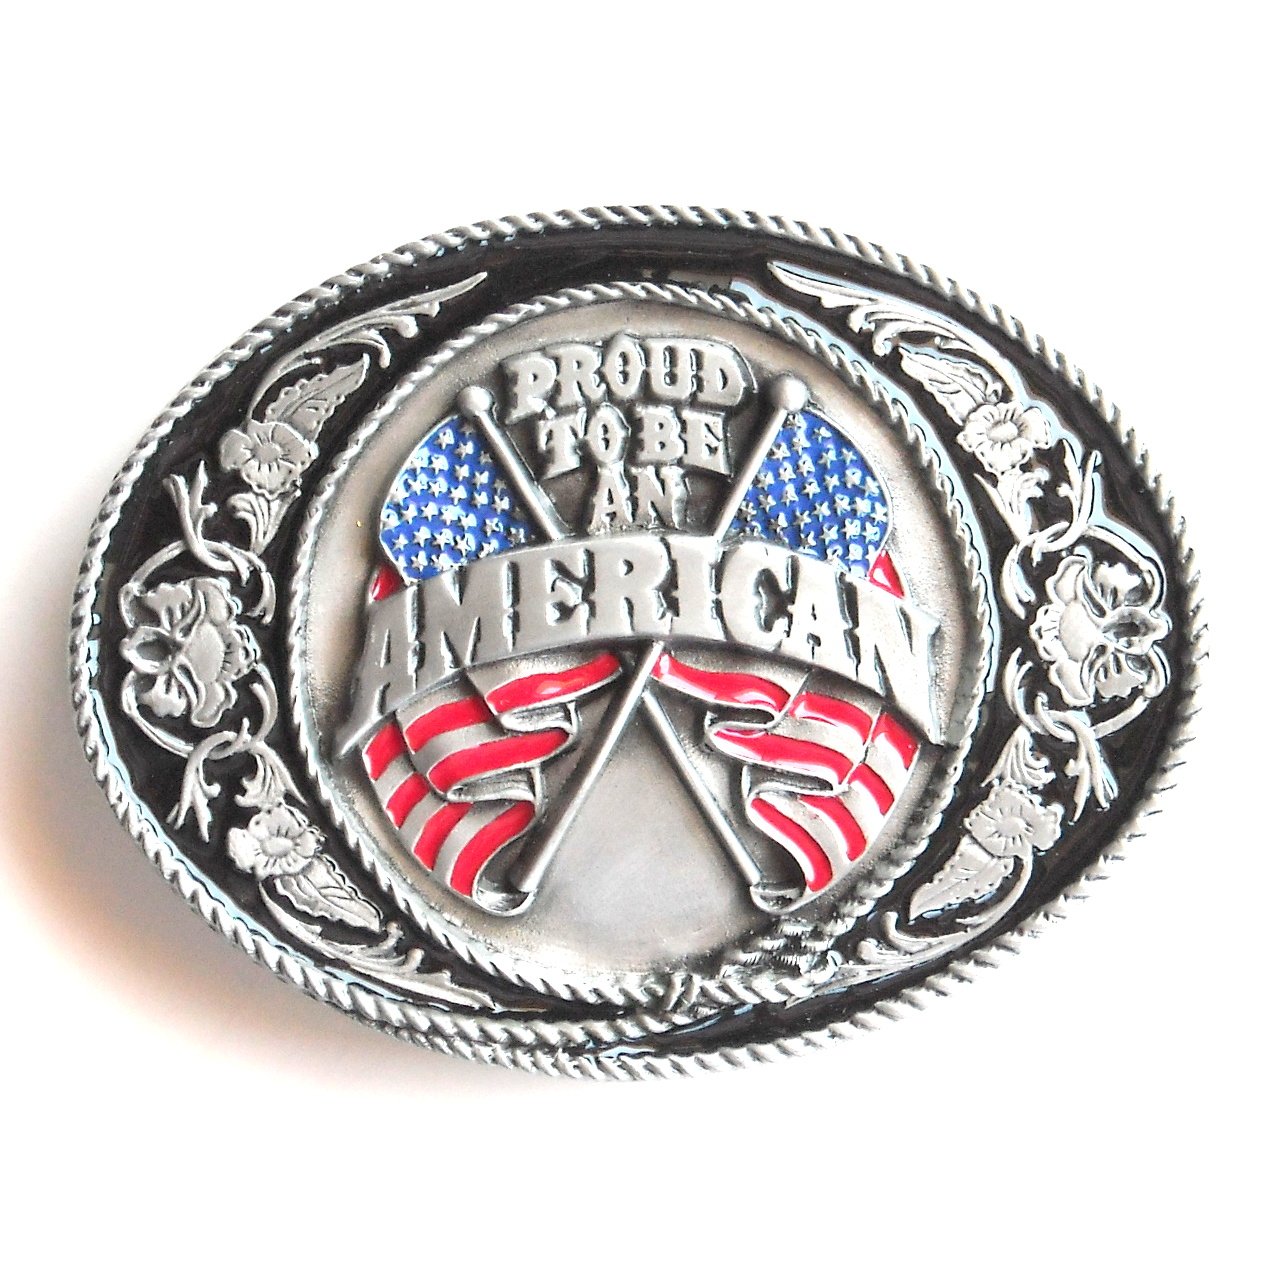 Proud To Be An American Siskiyou Pewter Belt Buckle